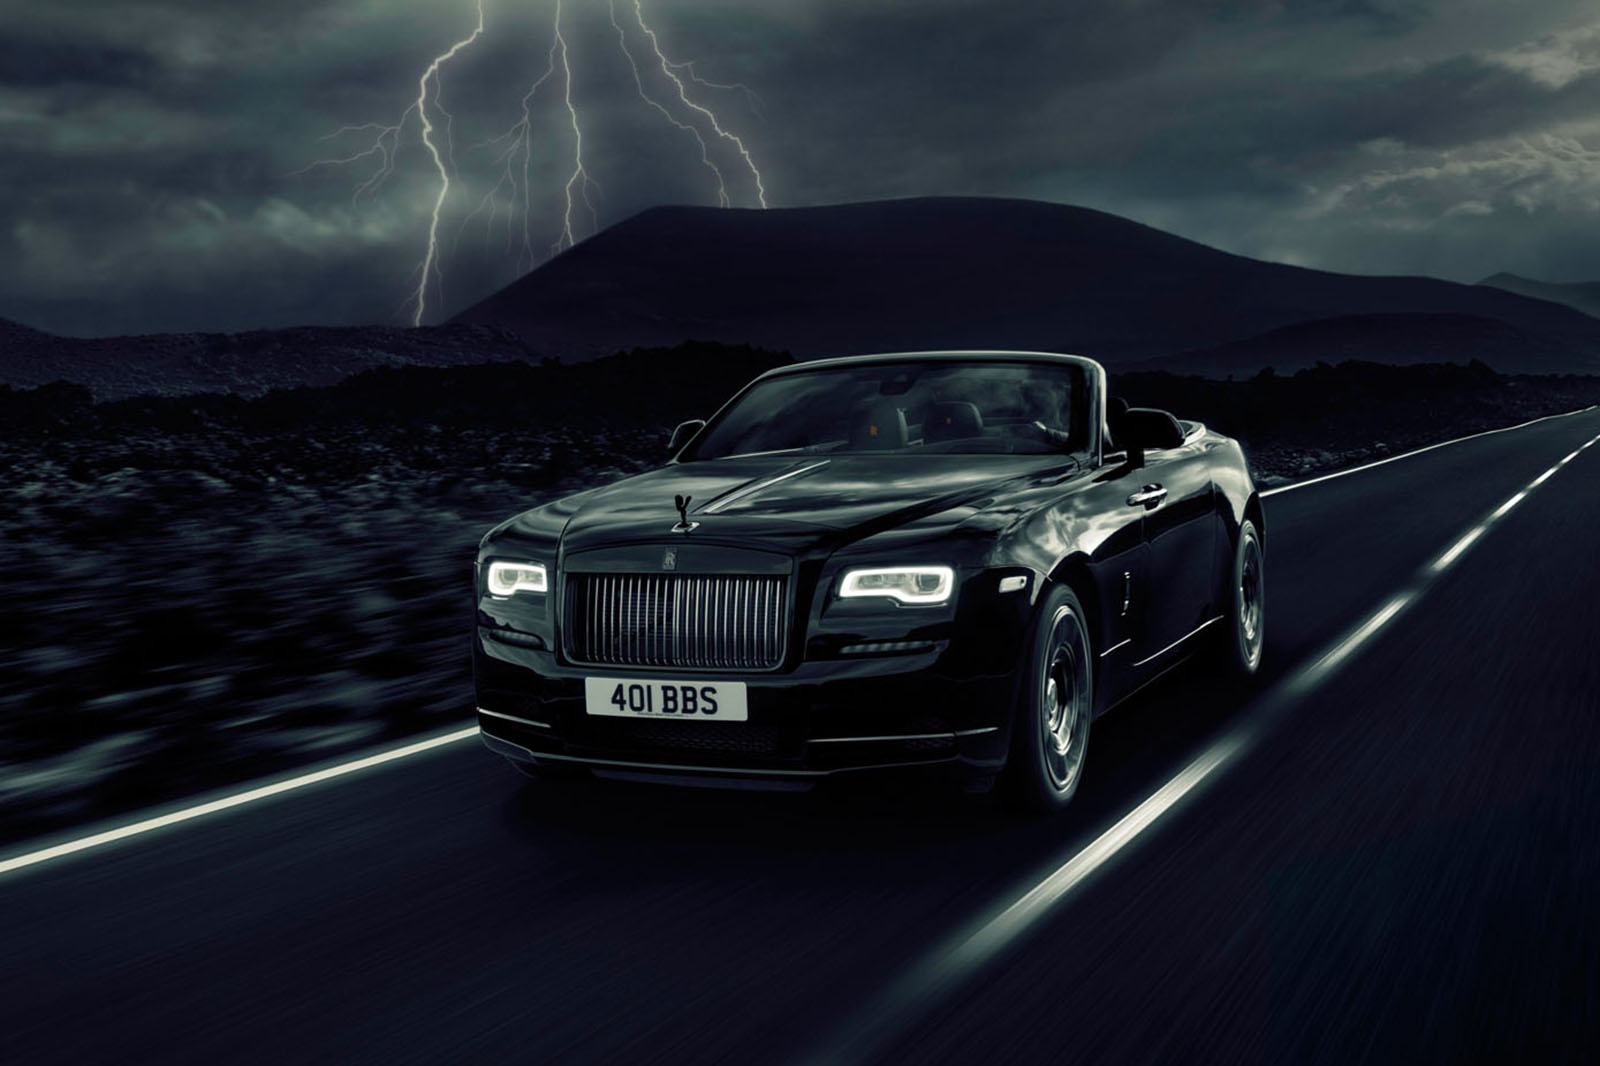 The Rolls-Royce Ghost Is an Unlikely Object of My Obsession